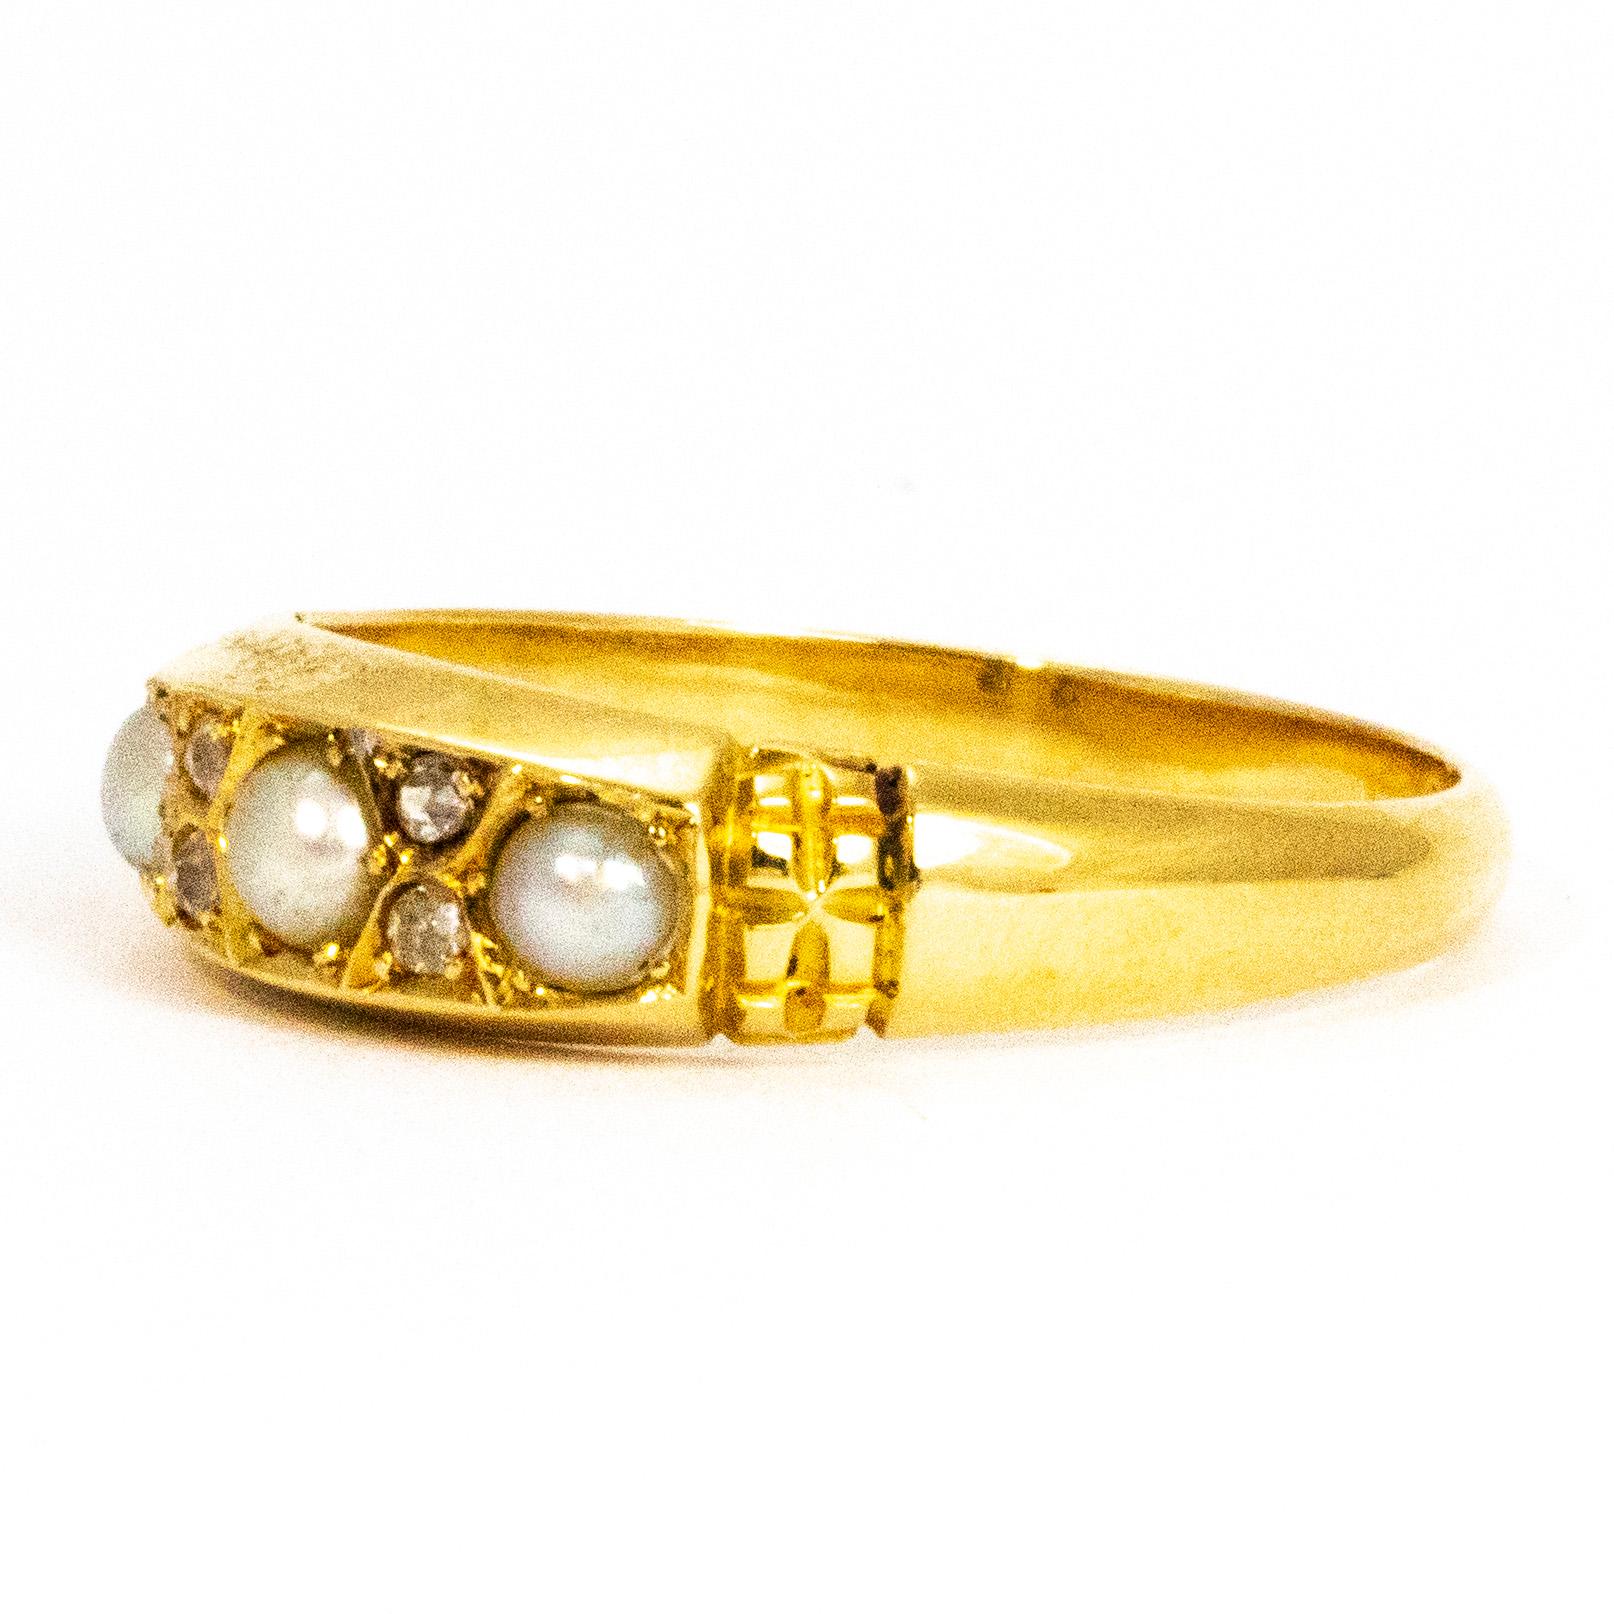 This gorgeous band holds three pearls and in between them sit a pair of double diamonds. The sheen on the pearls are beautifully complemented by the sparkling diamonds. Modelled in 18ct gold.

Ring Size: S or 9
Band Width: 6mm